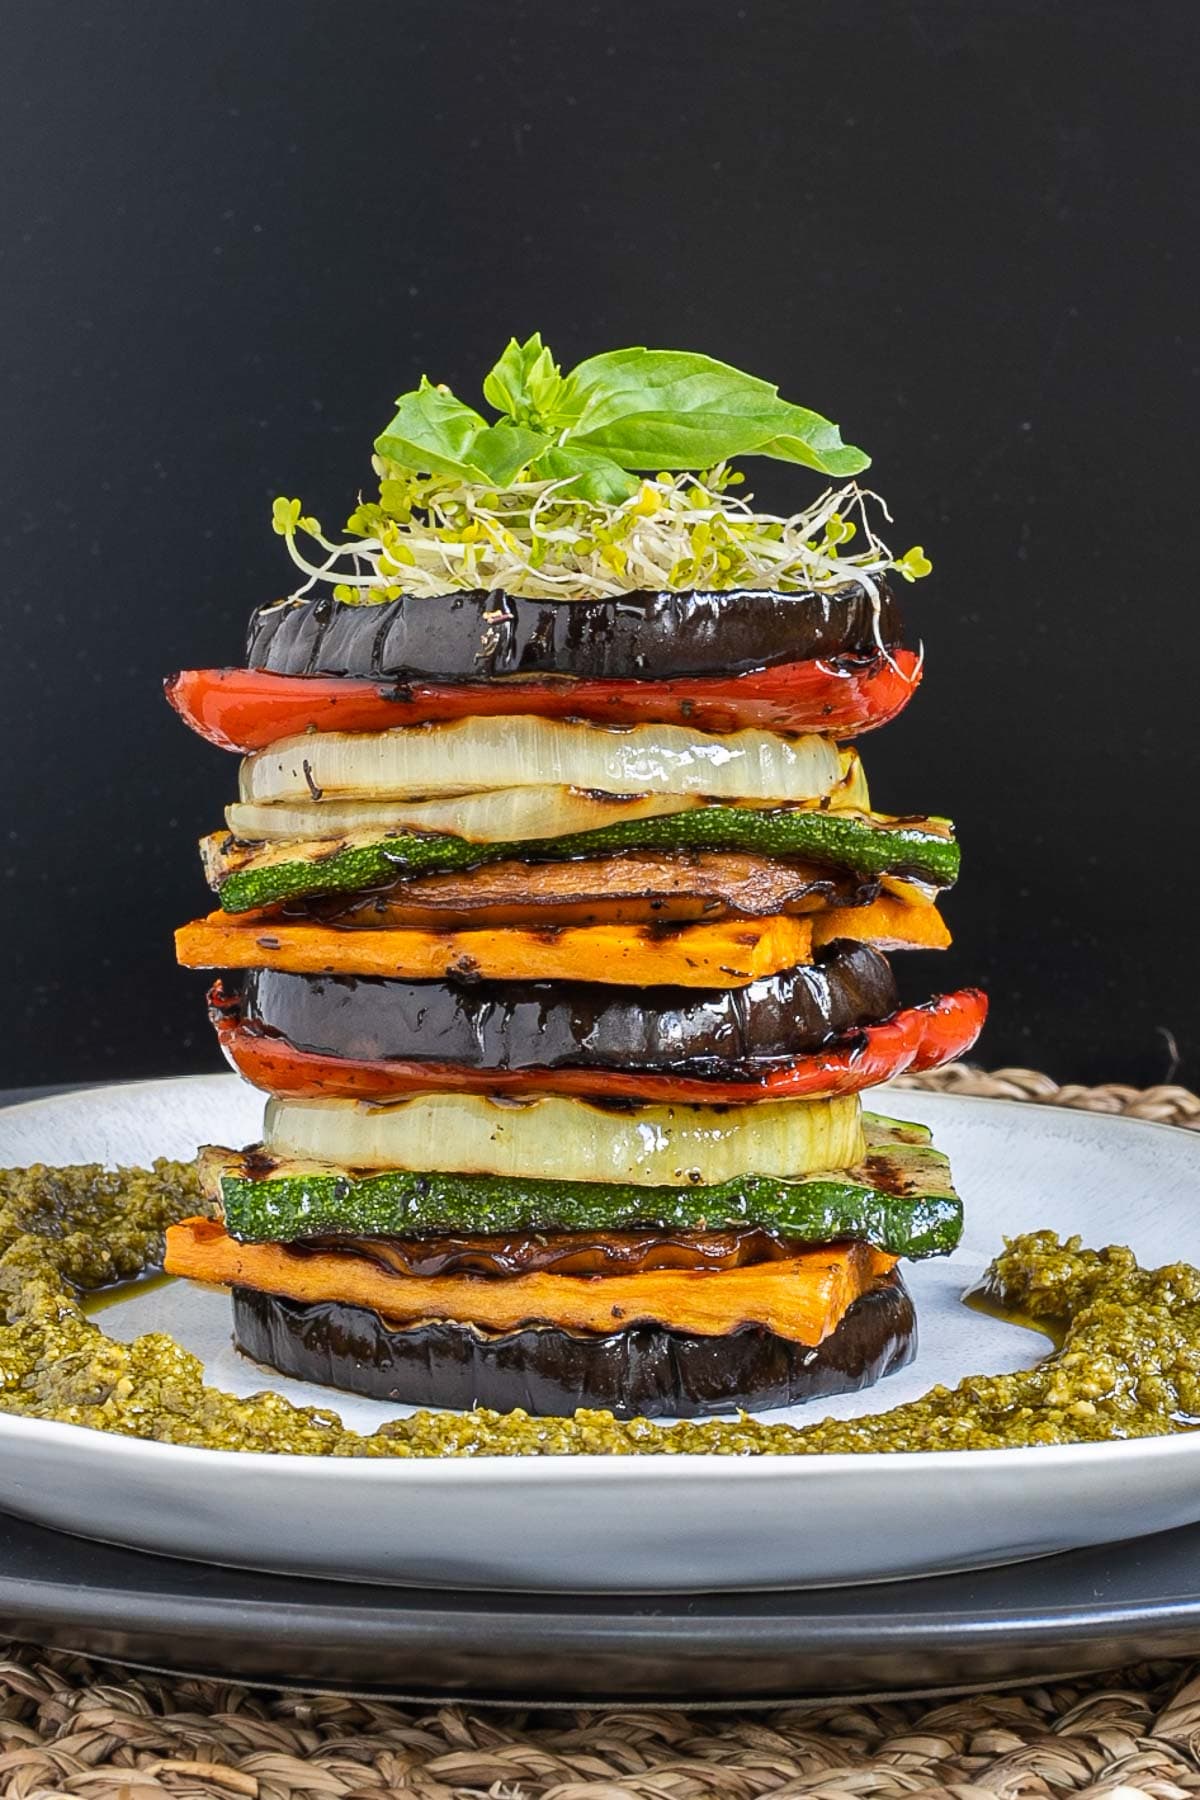 Different veggie slices are stack on top of each other to create a tower of veggies. It has eggplant, zucchini, sweet potato, onion, red bell pepper and mushroom slices. Green pesto is served around it. It is topped with sprouts and basil leaves.